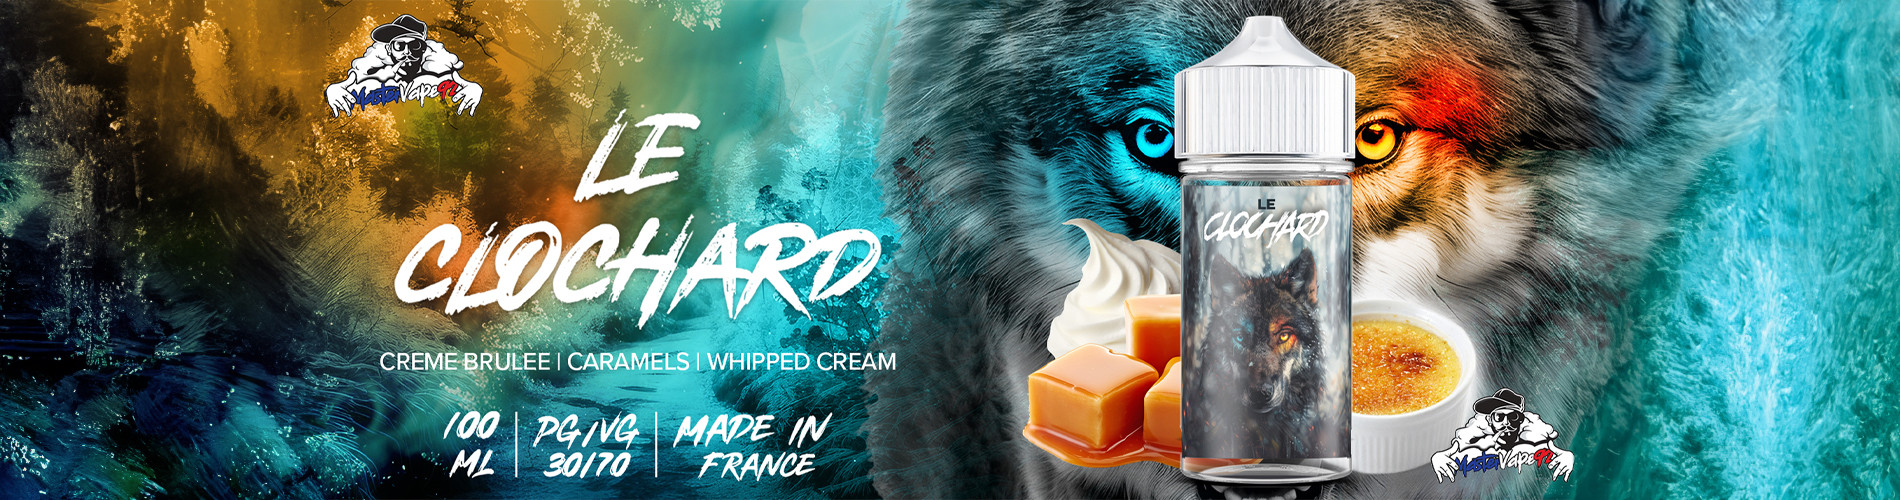 Discover Le Clochard 100ml E-liquid from Master Vape92: Flavor and Quality